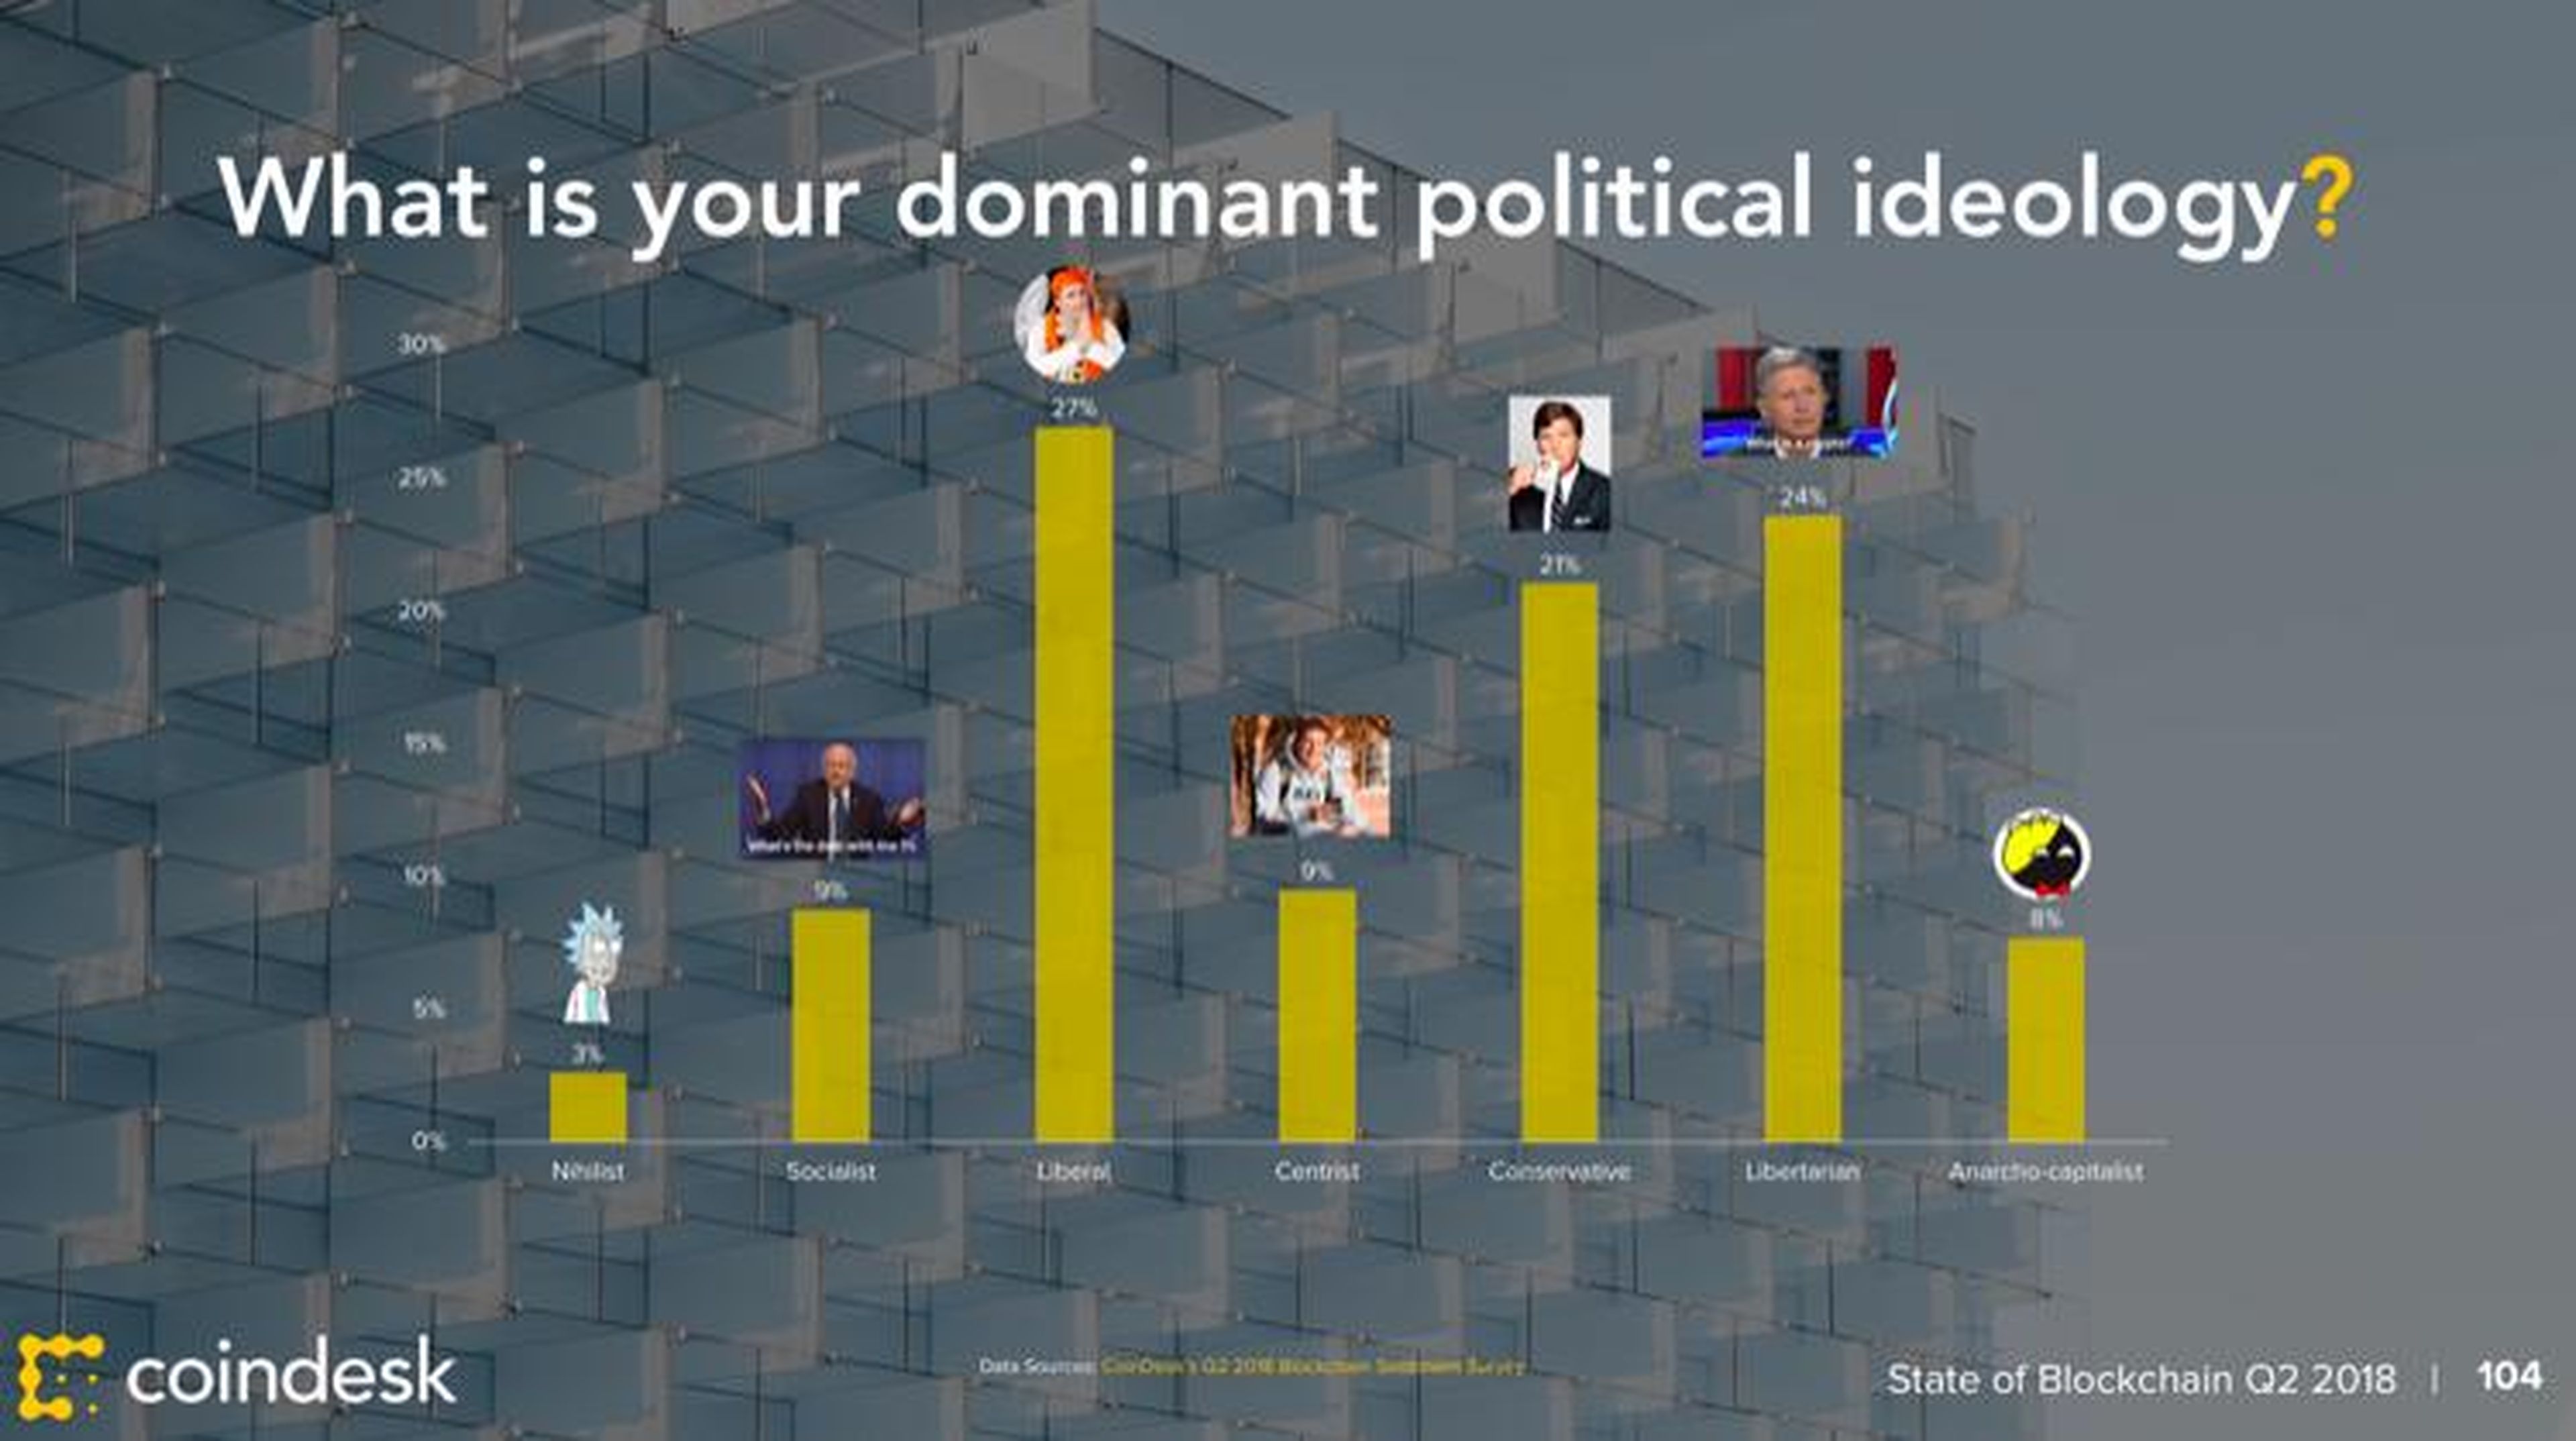 CoinDesk surveyed 1,200 crypto investors and found their dominant political ideology may not be what you think